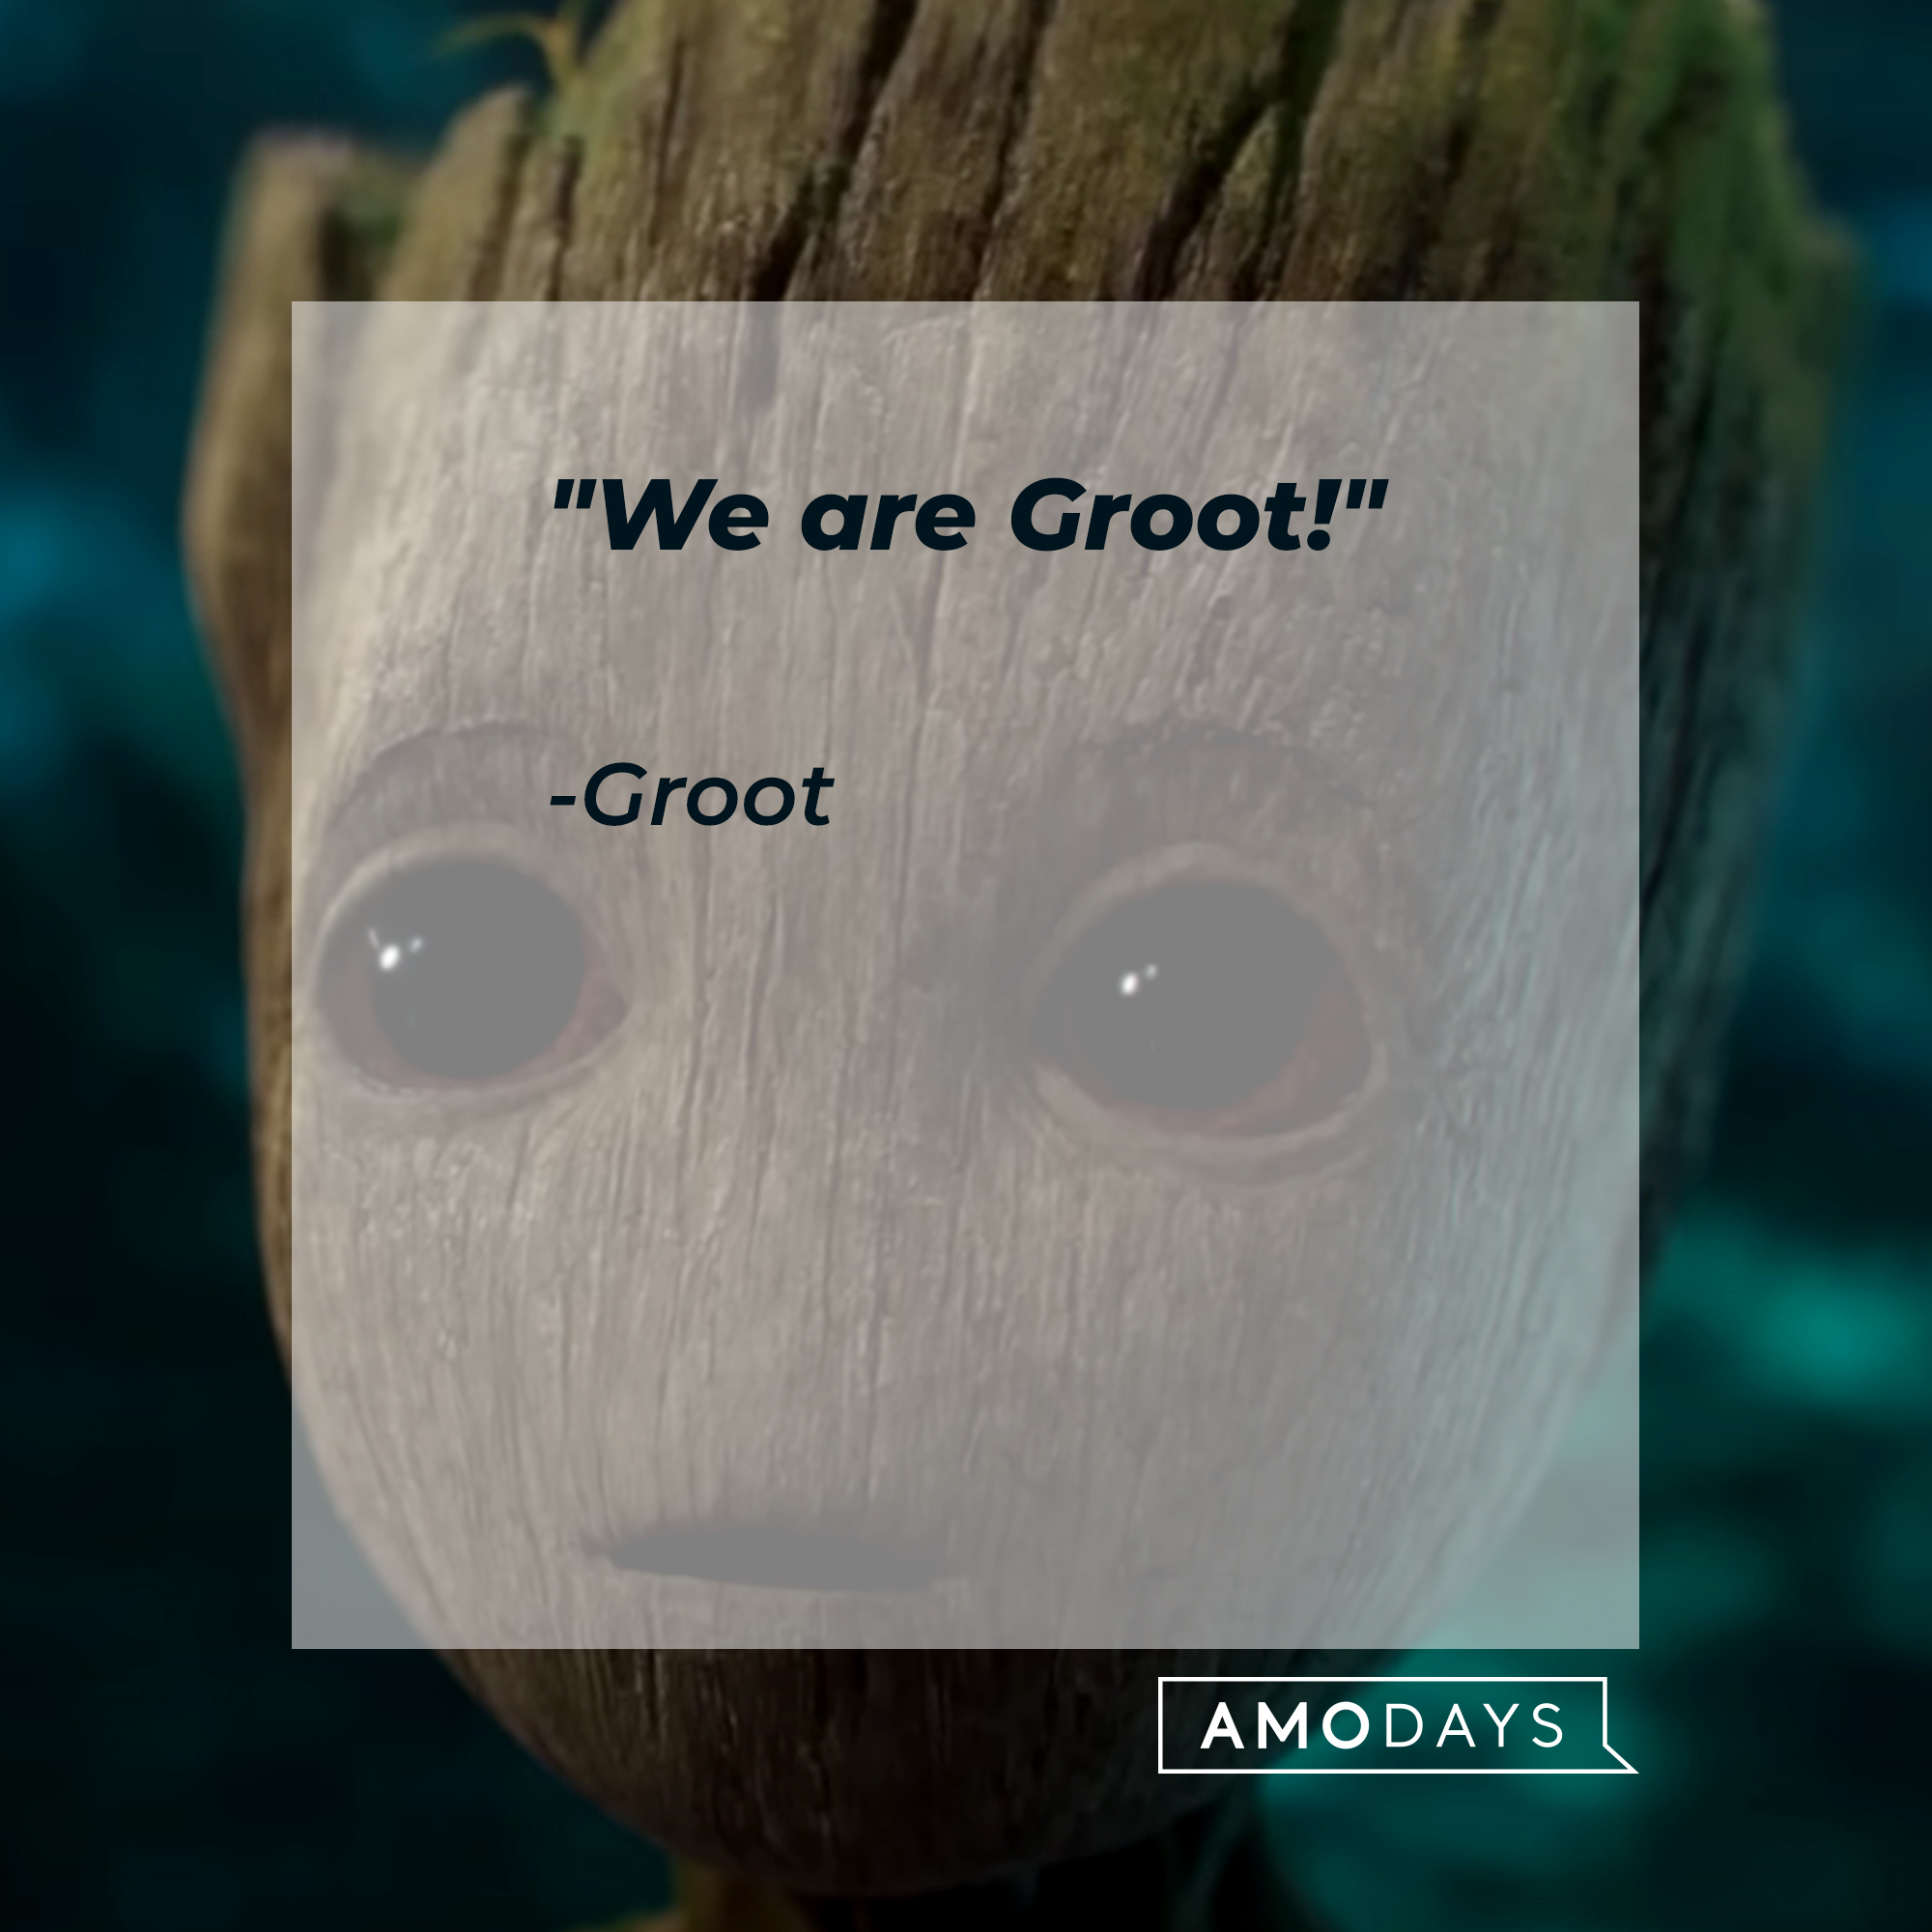 Groot's quote, "We are Groot!" | Image: youtube.com/marvel